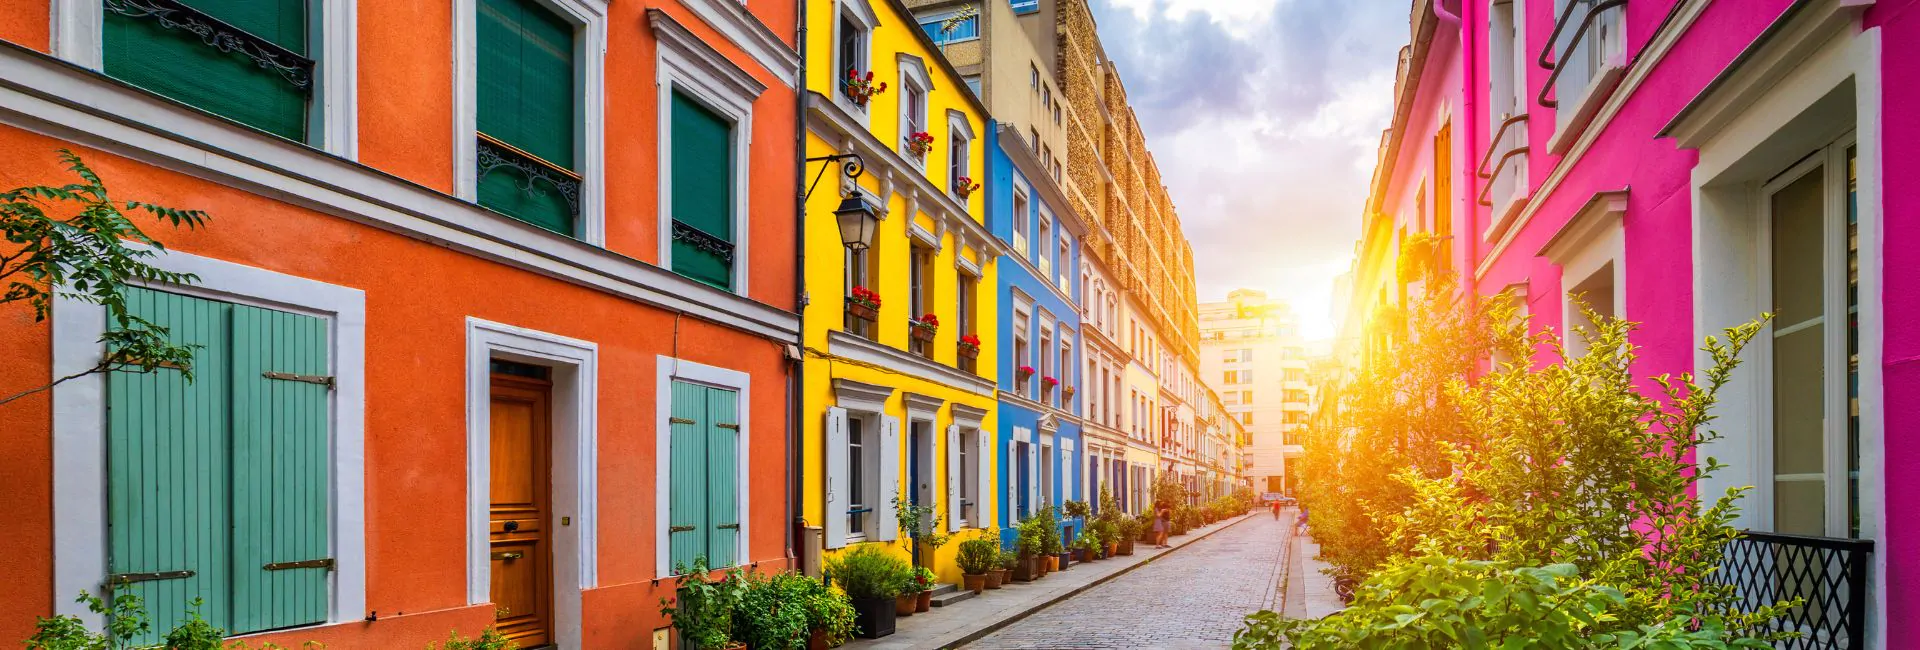 Colored houses in Rue Cremieux street in Paris